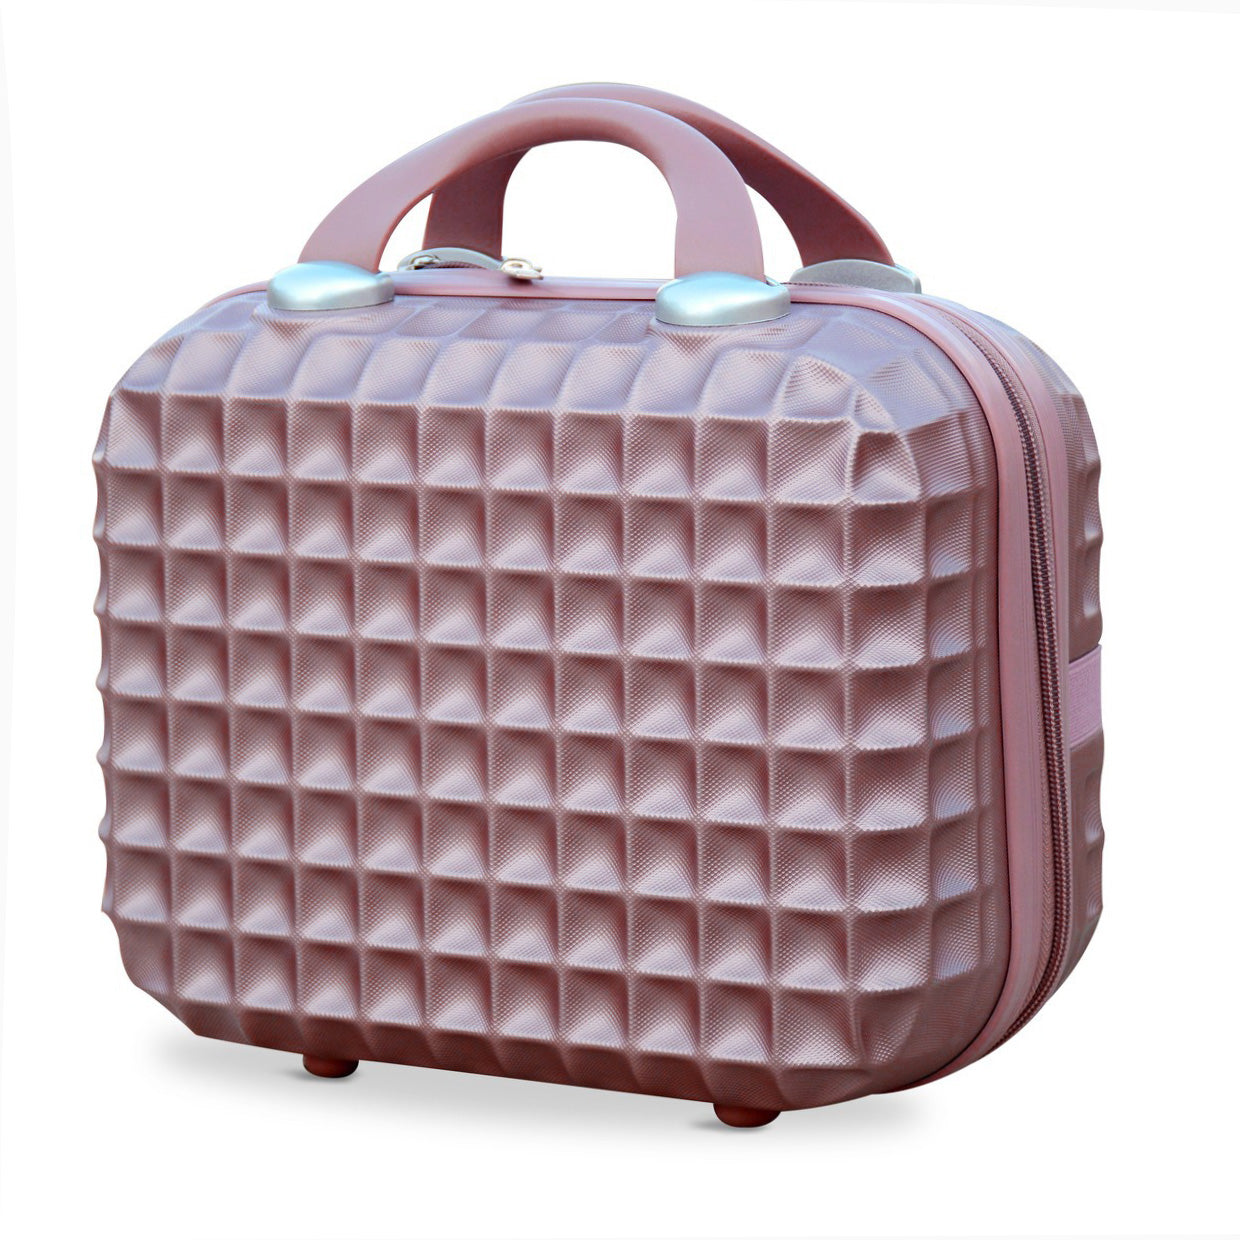 4 Pcs Set 7” 20” 24” 28 Inches Lightweight ABS Luggage Square Cut Rose Gold | Hard Case Trolley Bag